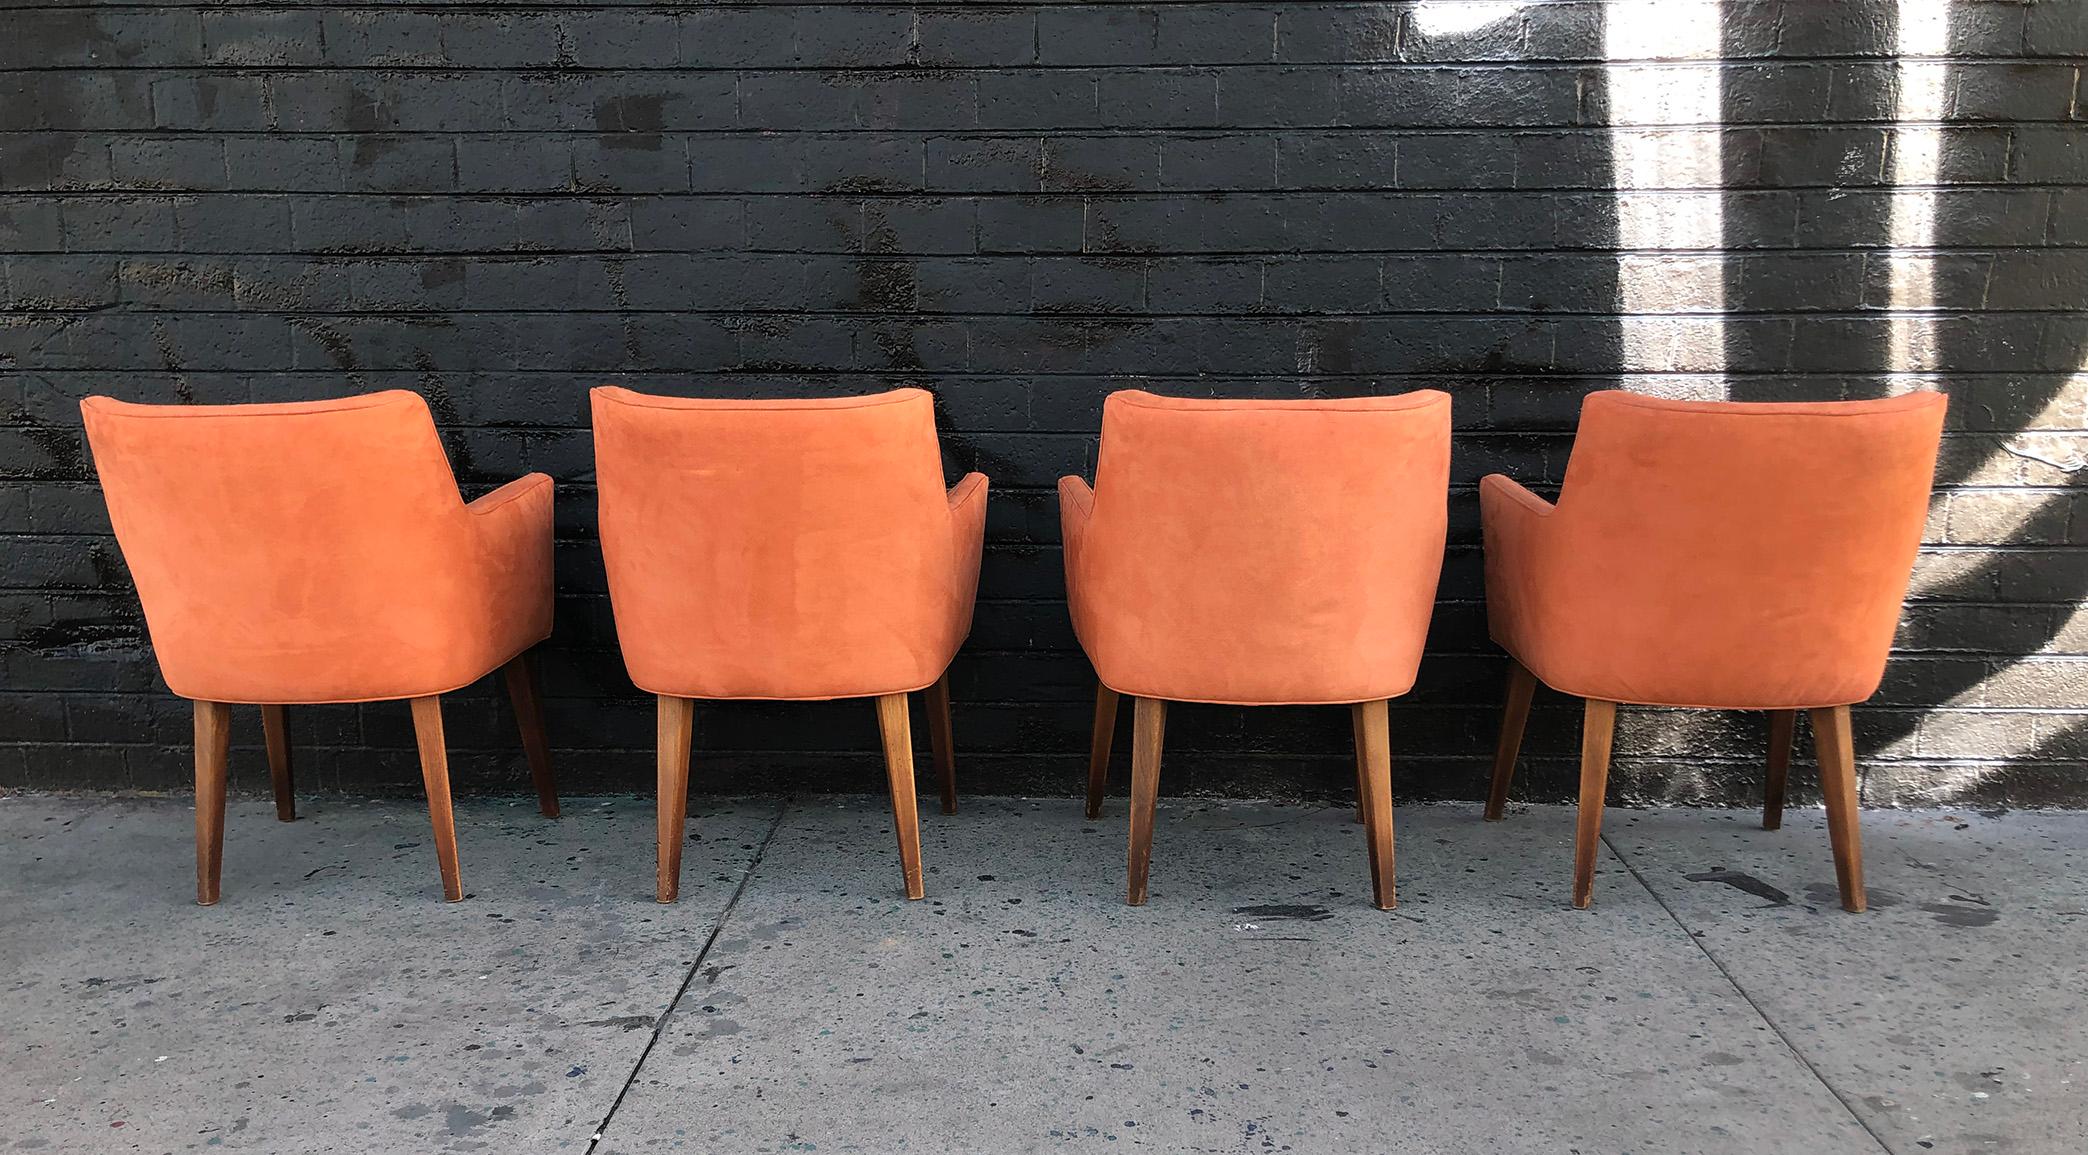 Wood Set of 4 Mid-Century Modern Dining Chairs